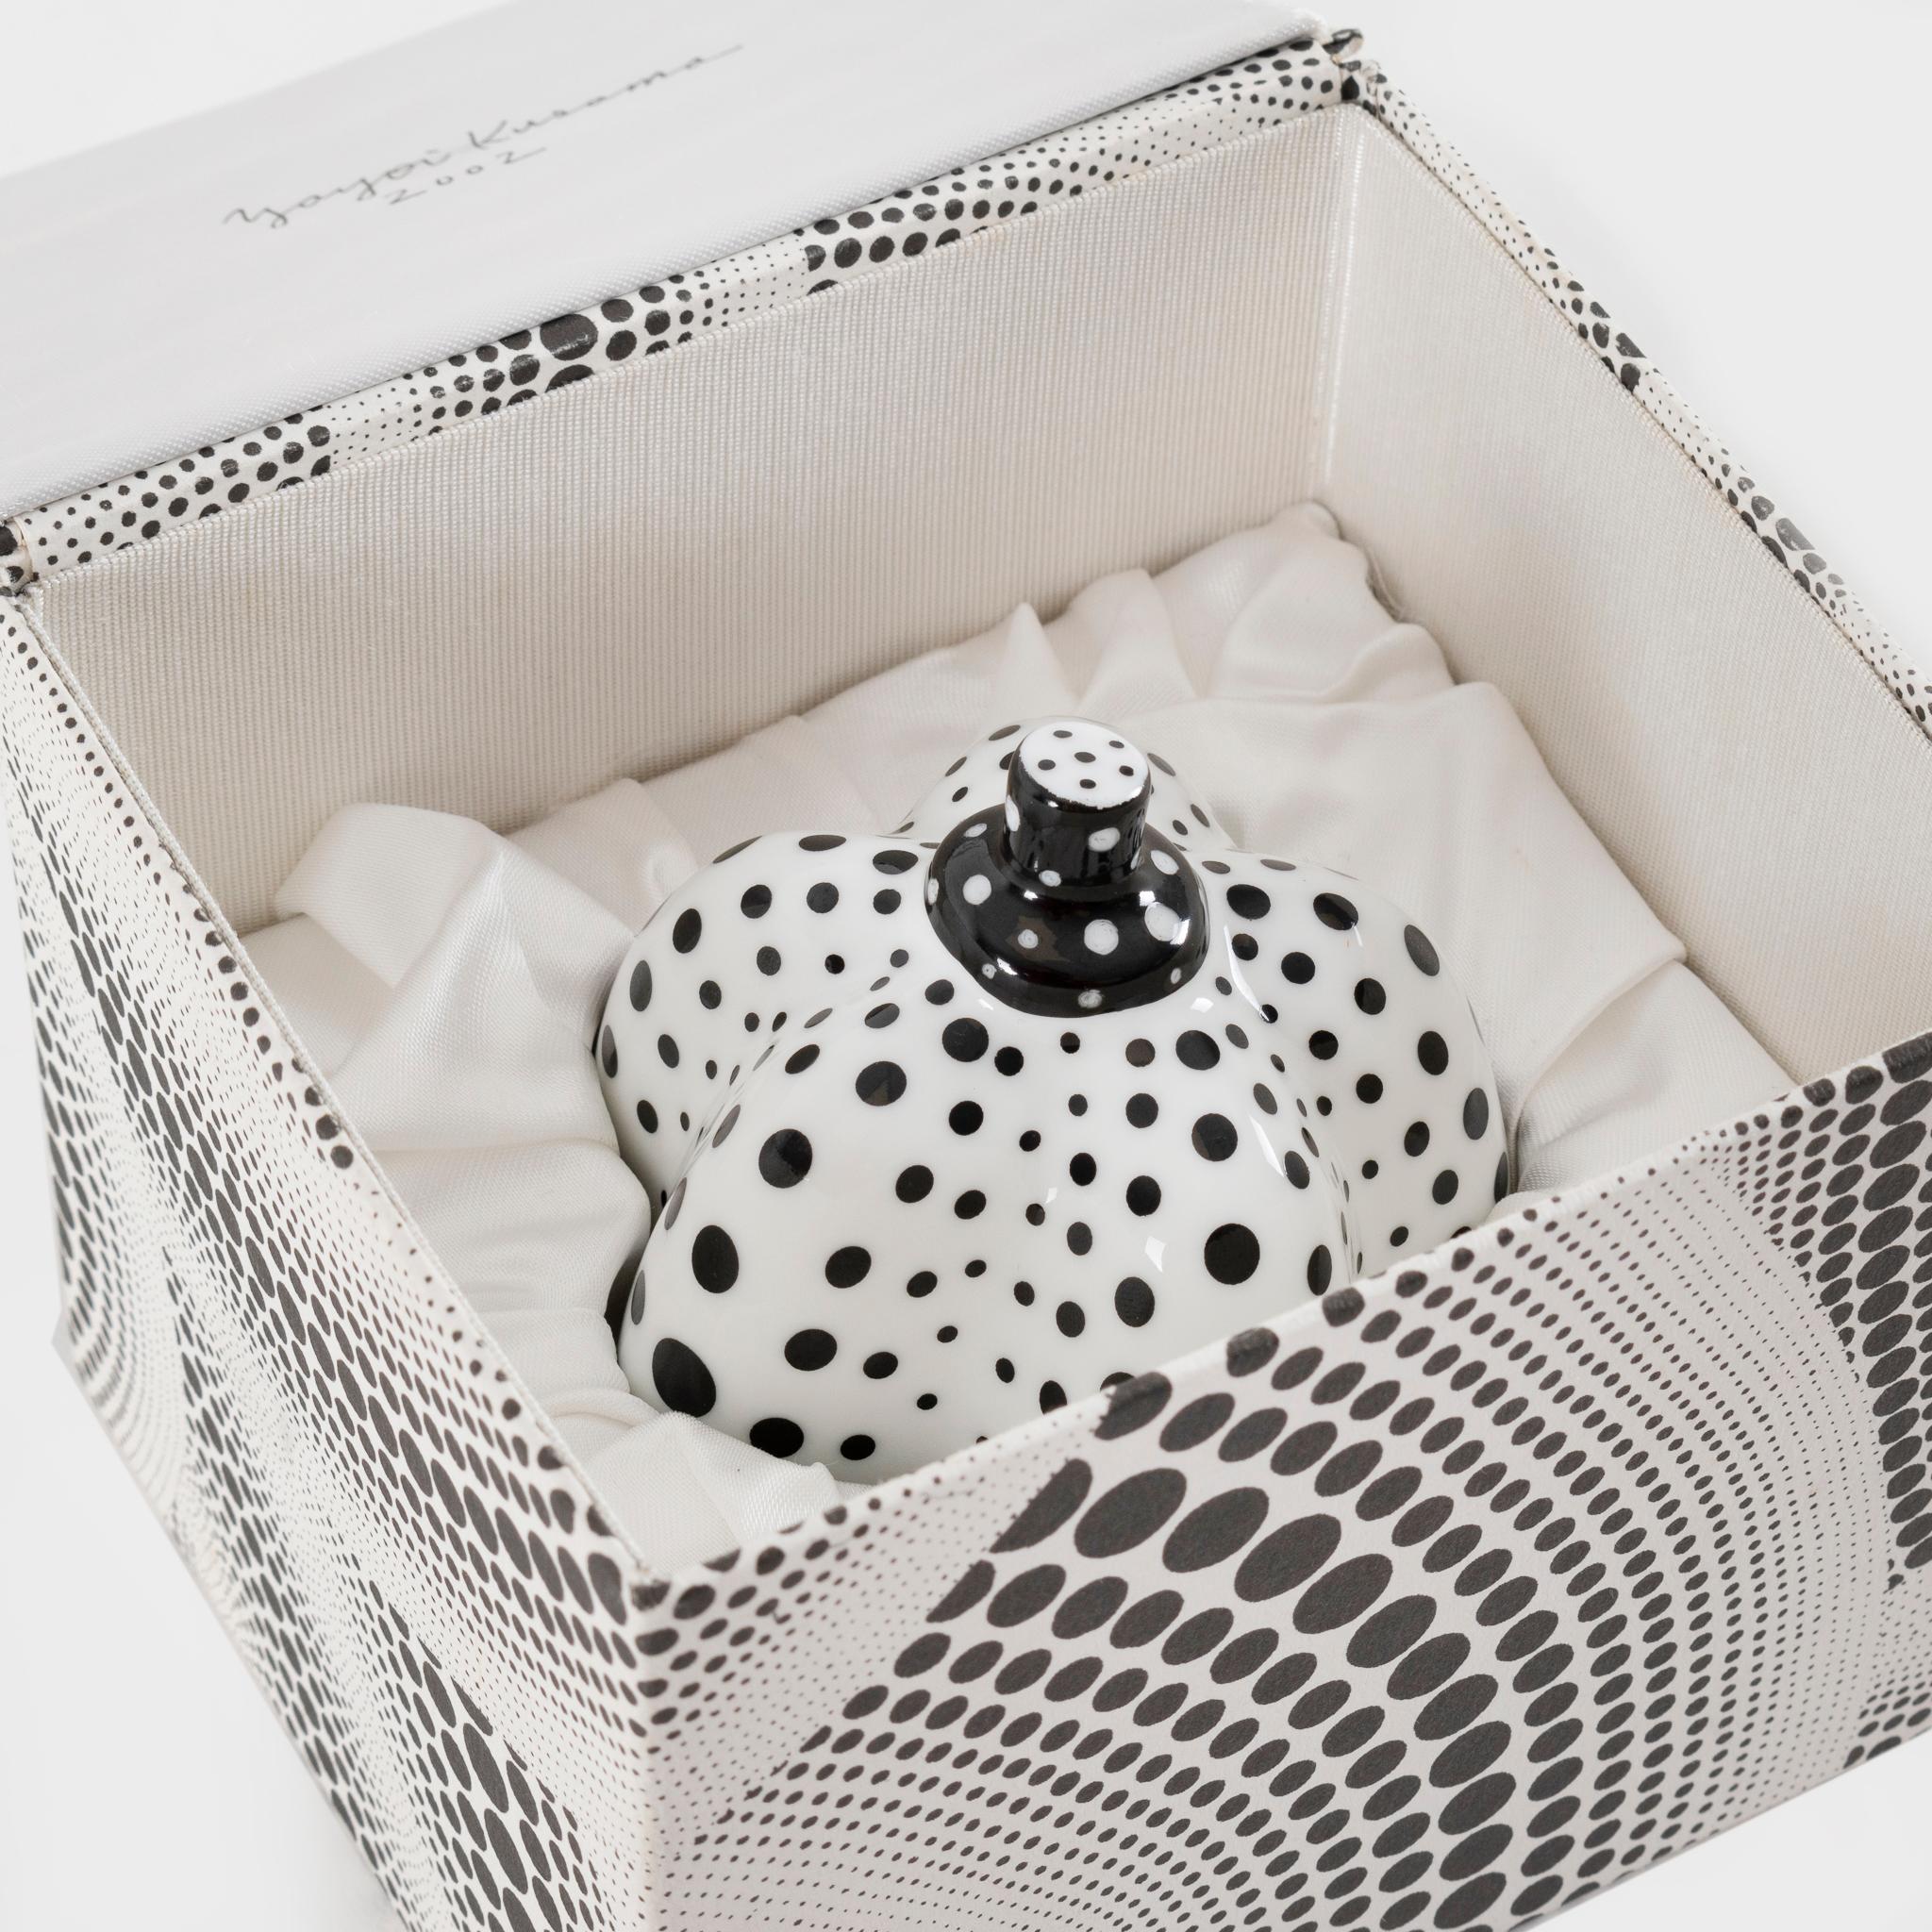 Pumpkin (Limoges) (White and Black), 2002, Ceramic Editioned Sculpture - Gray Figurative Sculpture by Yayoi Kusama